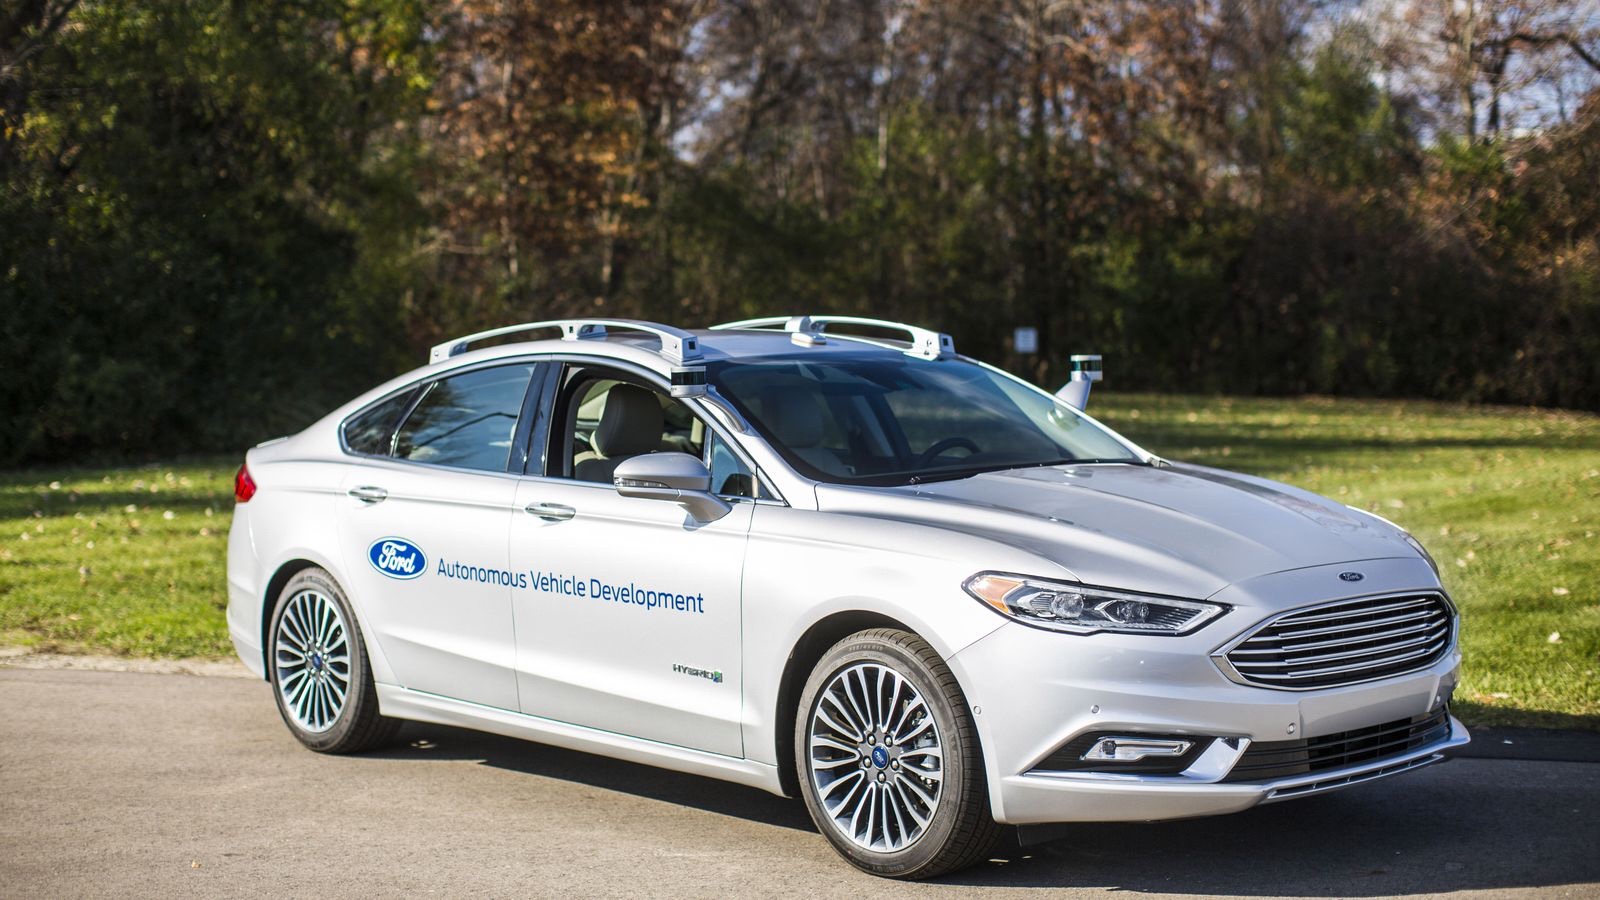 Ford and Postmates are teaming up to deliver orders with self-driving cars